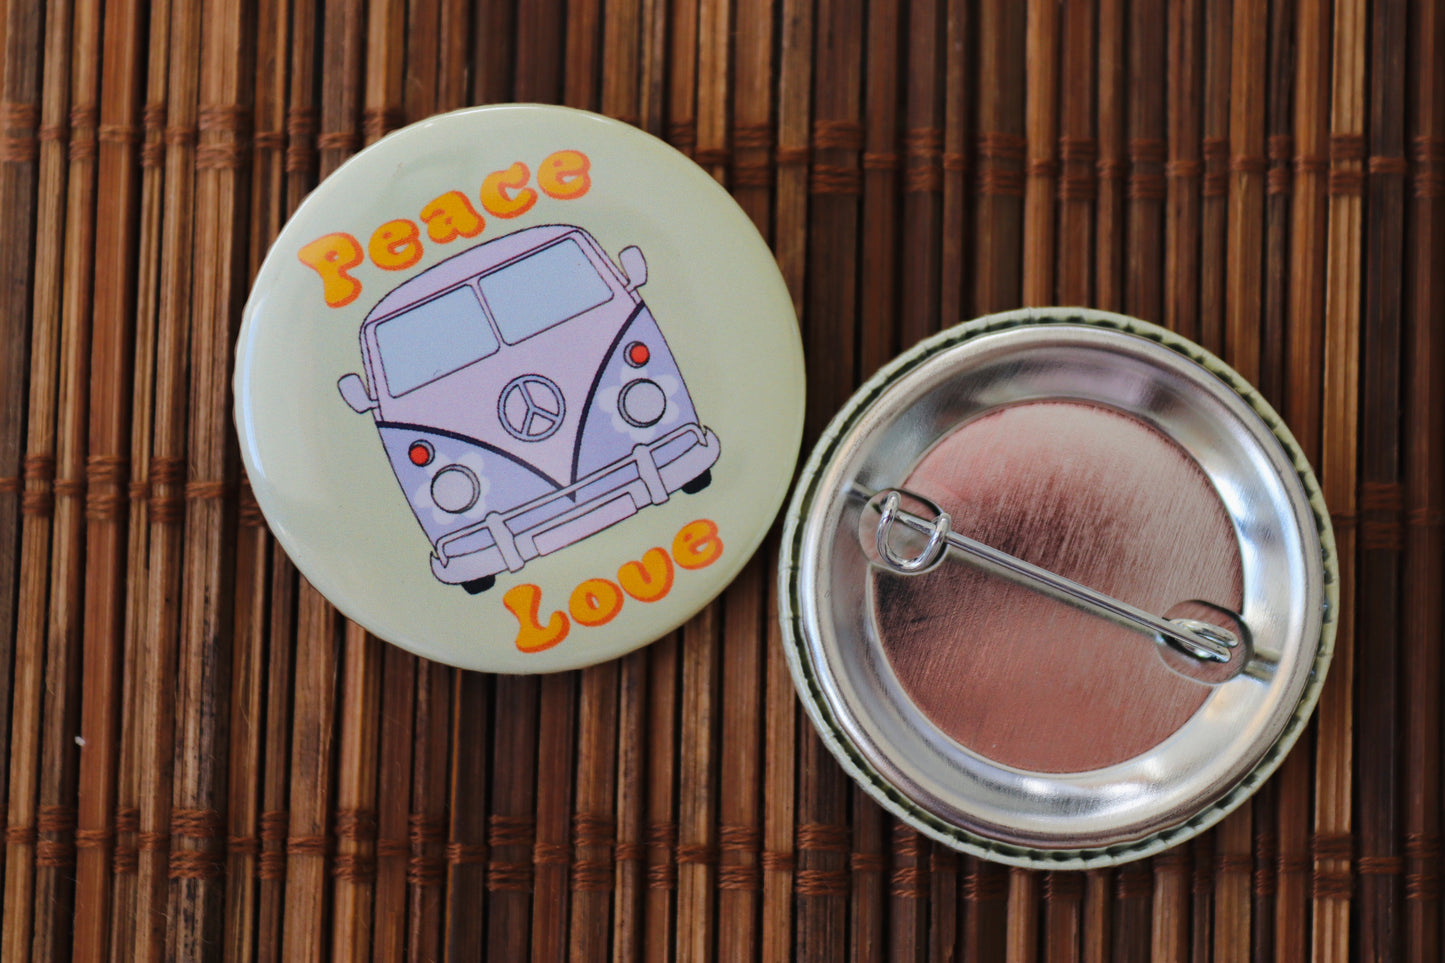 Peace And Love Camper Van Button Badge